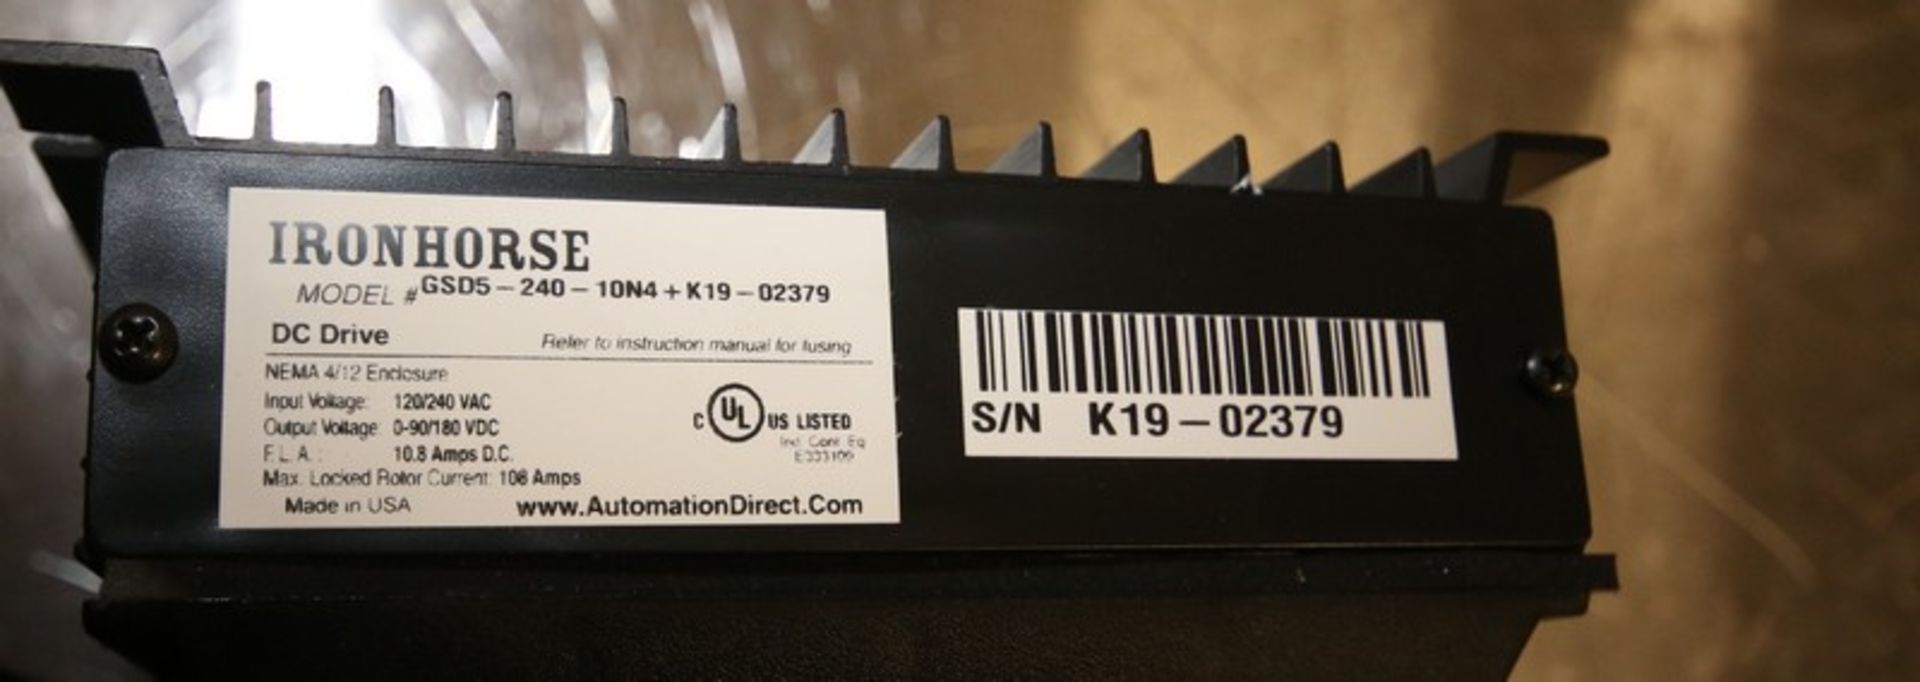 New Automation Direct DC Motor Speed Control Type Iron Horse Model GSD5--240-10N4+K19-02379 Input - Image 3 of 4